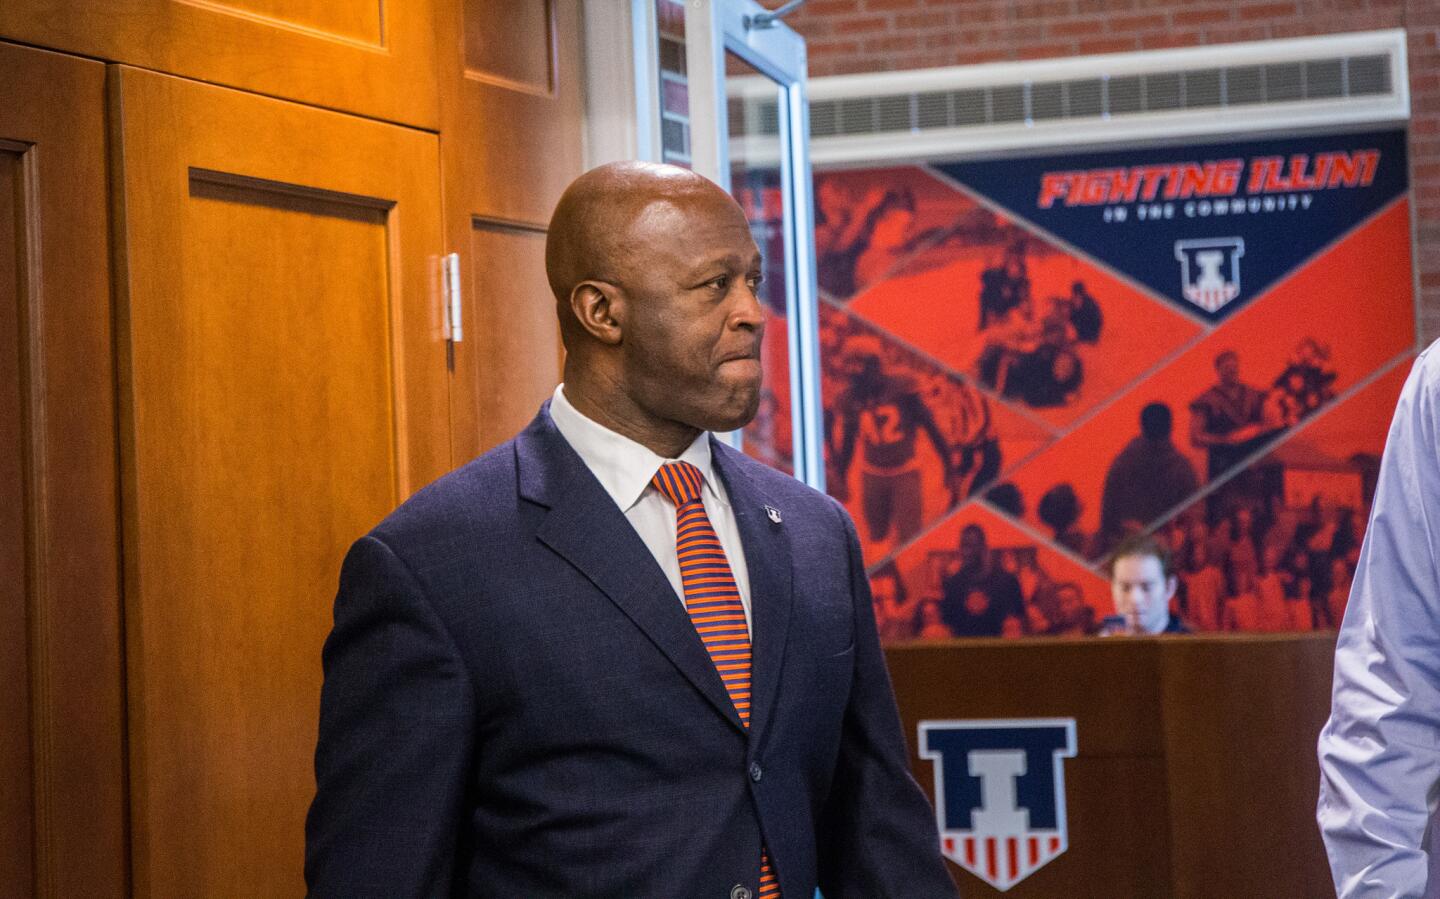 Lovie Smith arrives at the Bielfeldt Athletics Administration Building in Champaign for his introduction as the new Illini football coach on March 7, 2016.